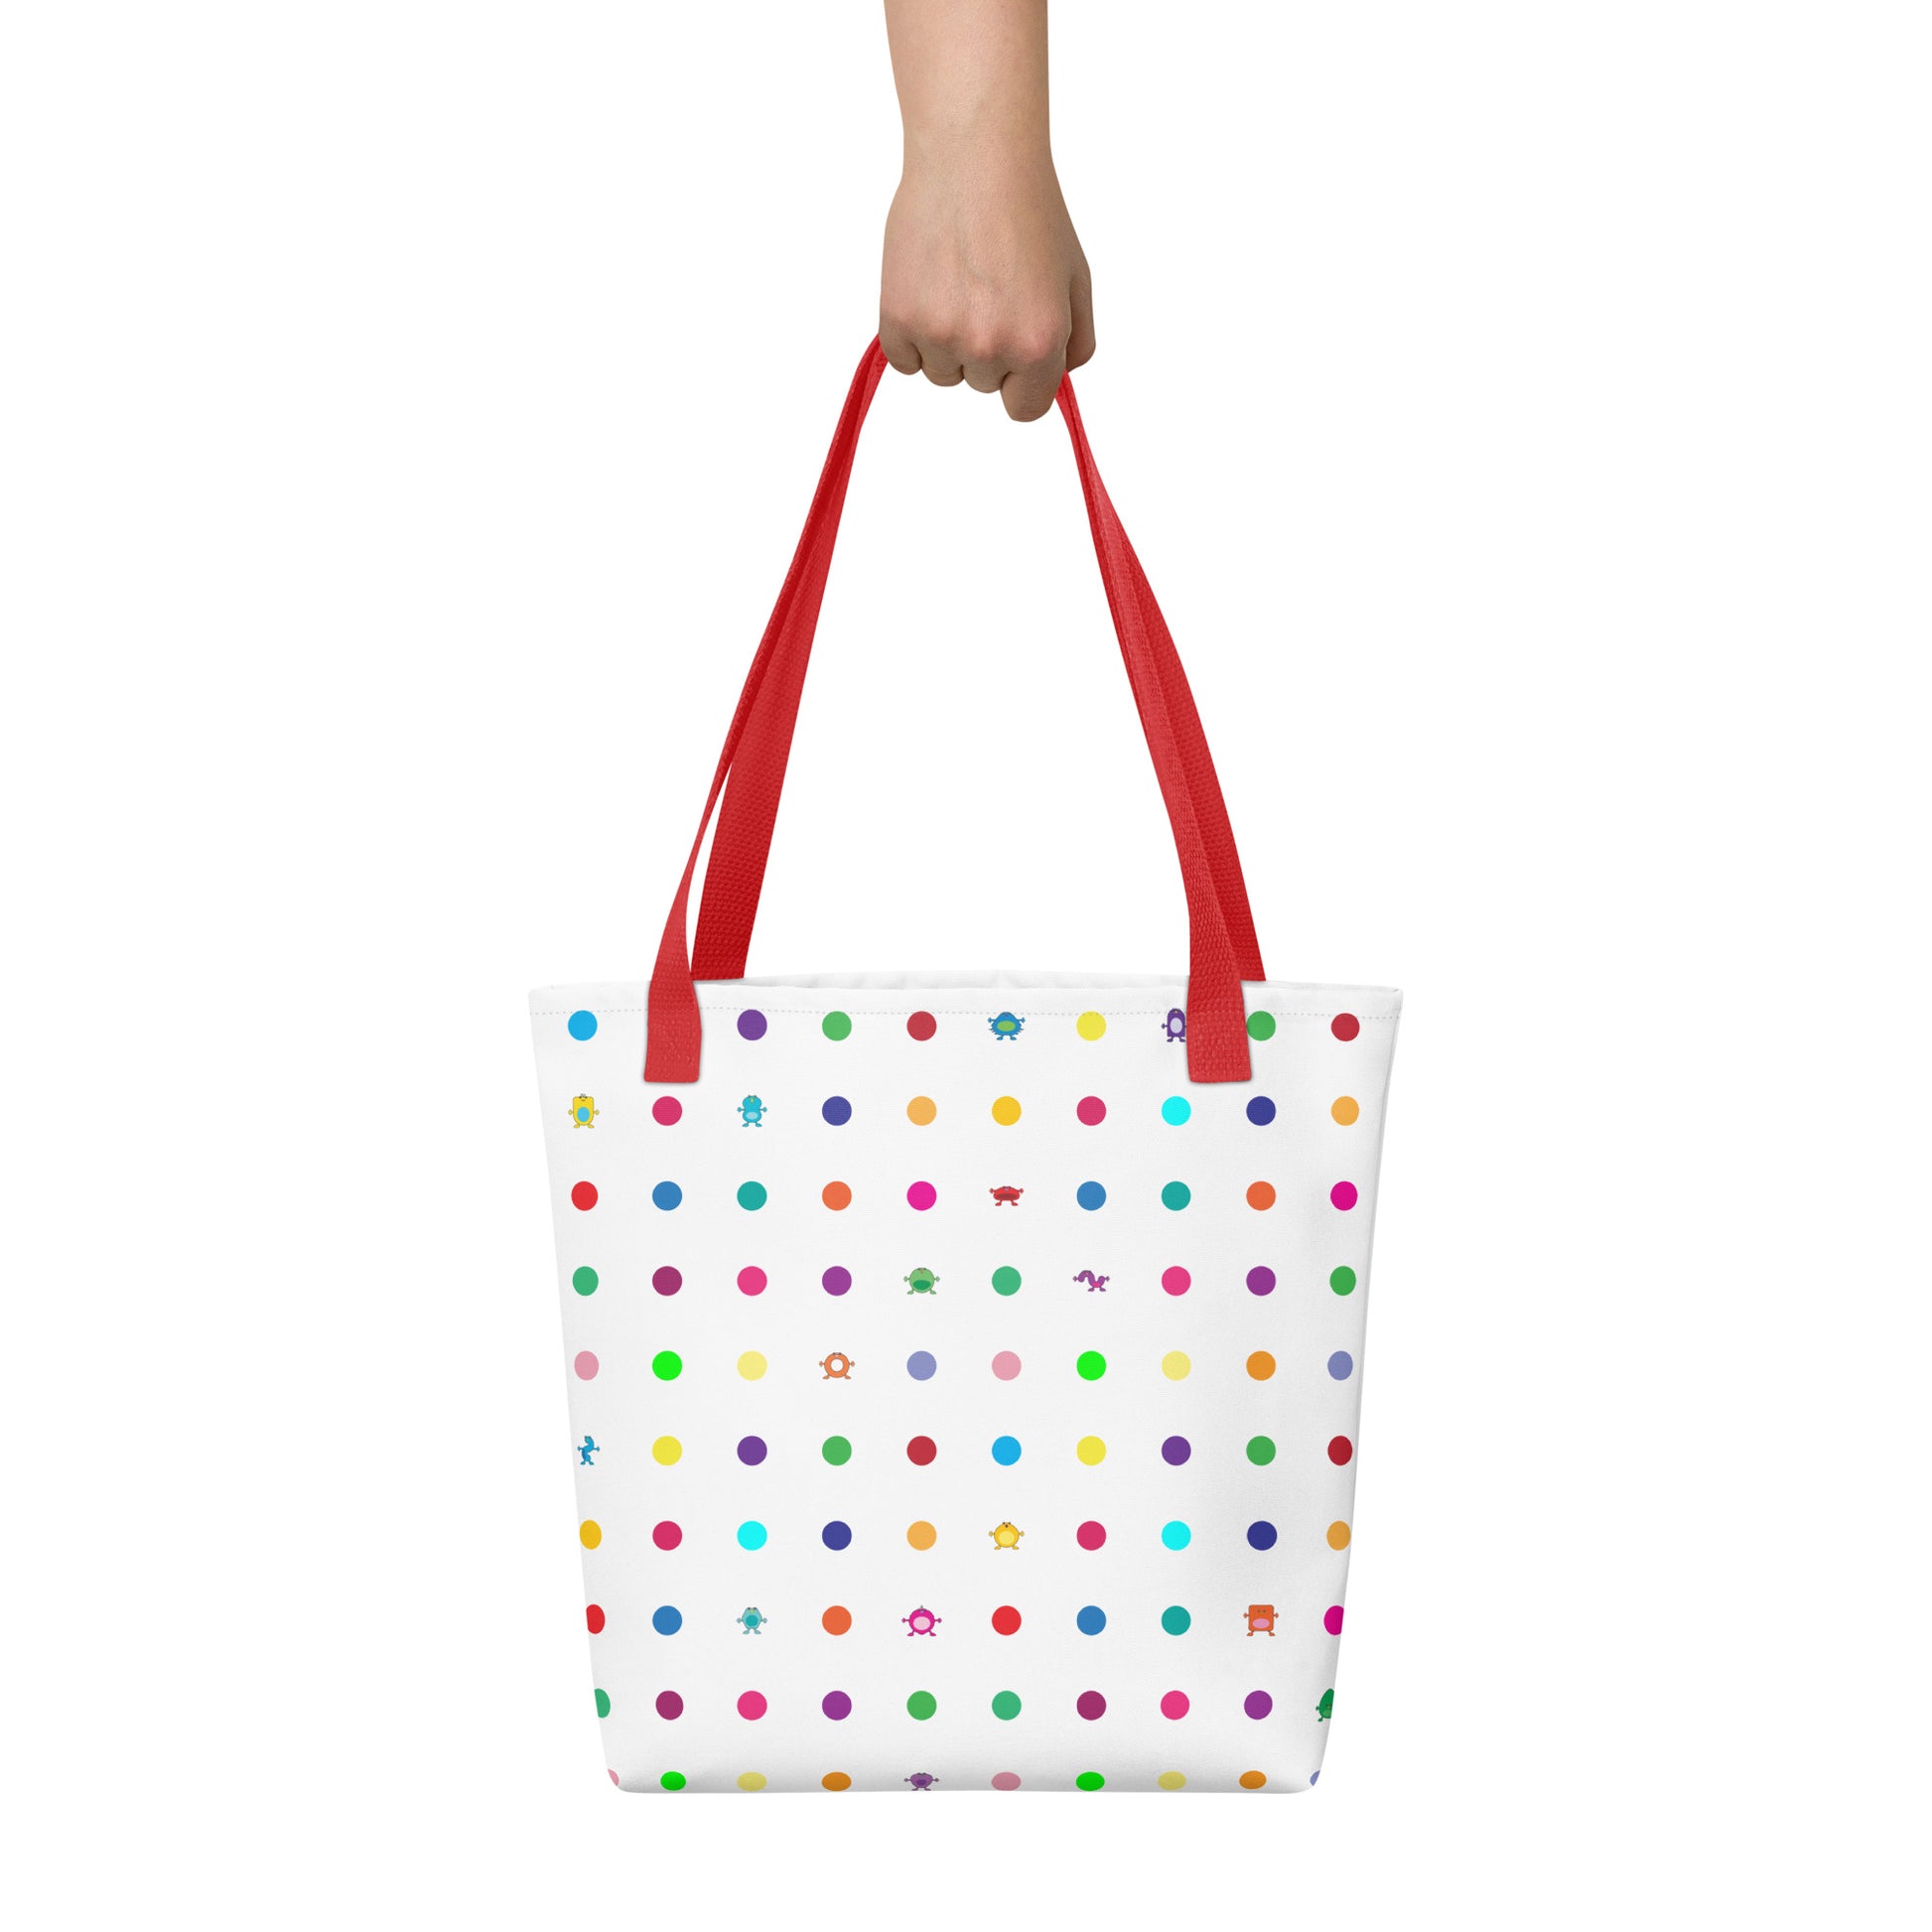 Medium dot and monster white Tote bag red handle